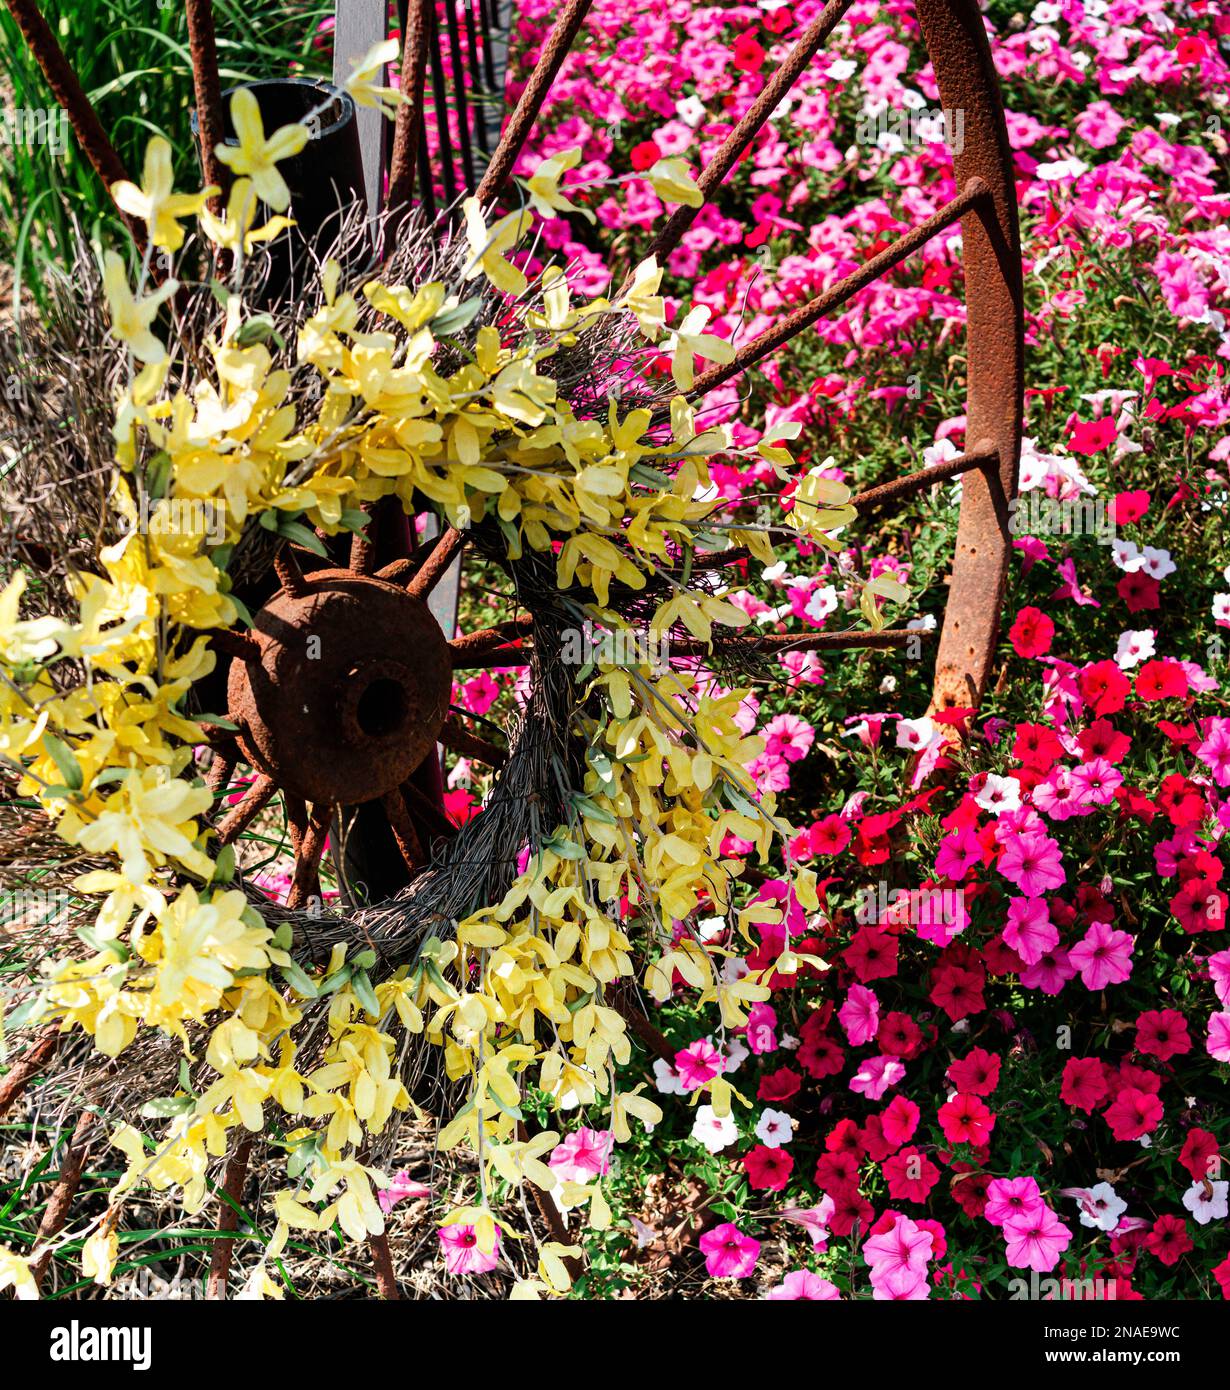 Wagon Wheel landscaping with florals Stock Photo